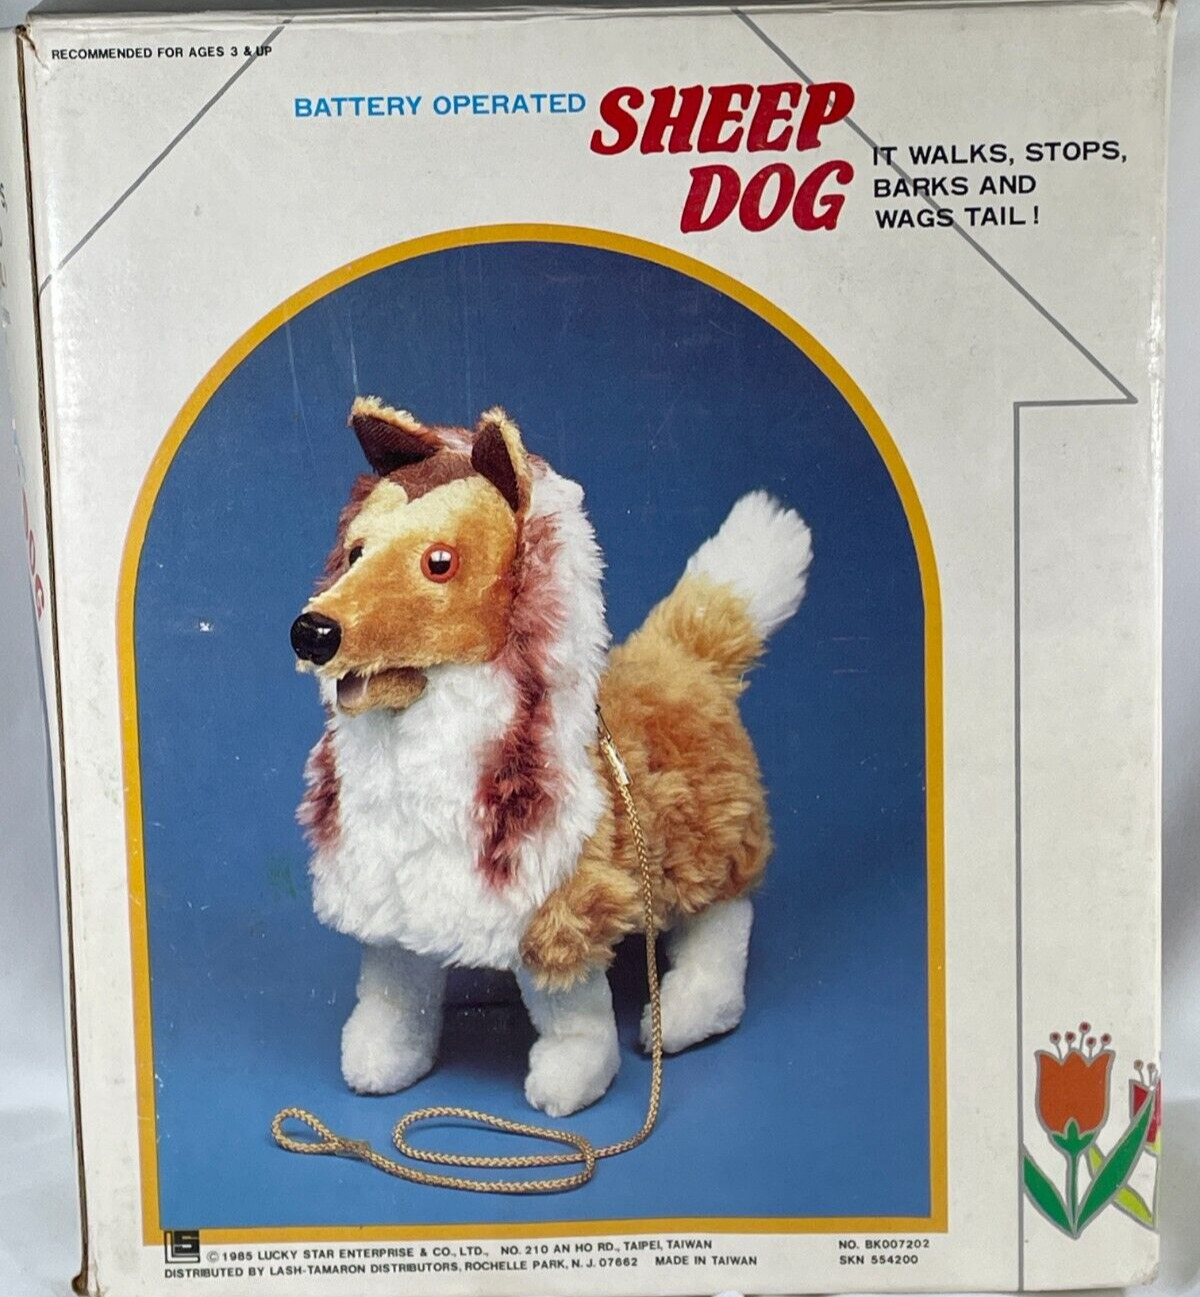 Vintage 1985 Lucky Star Battery-Operated Walking Sheepdog Toy w/ Leash - Collect